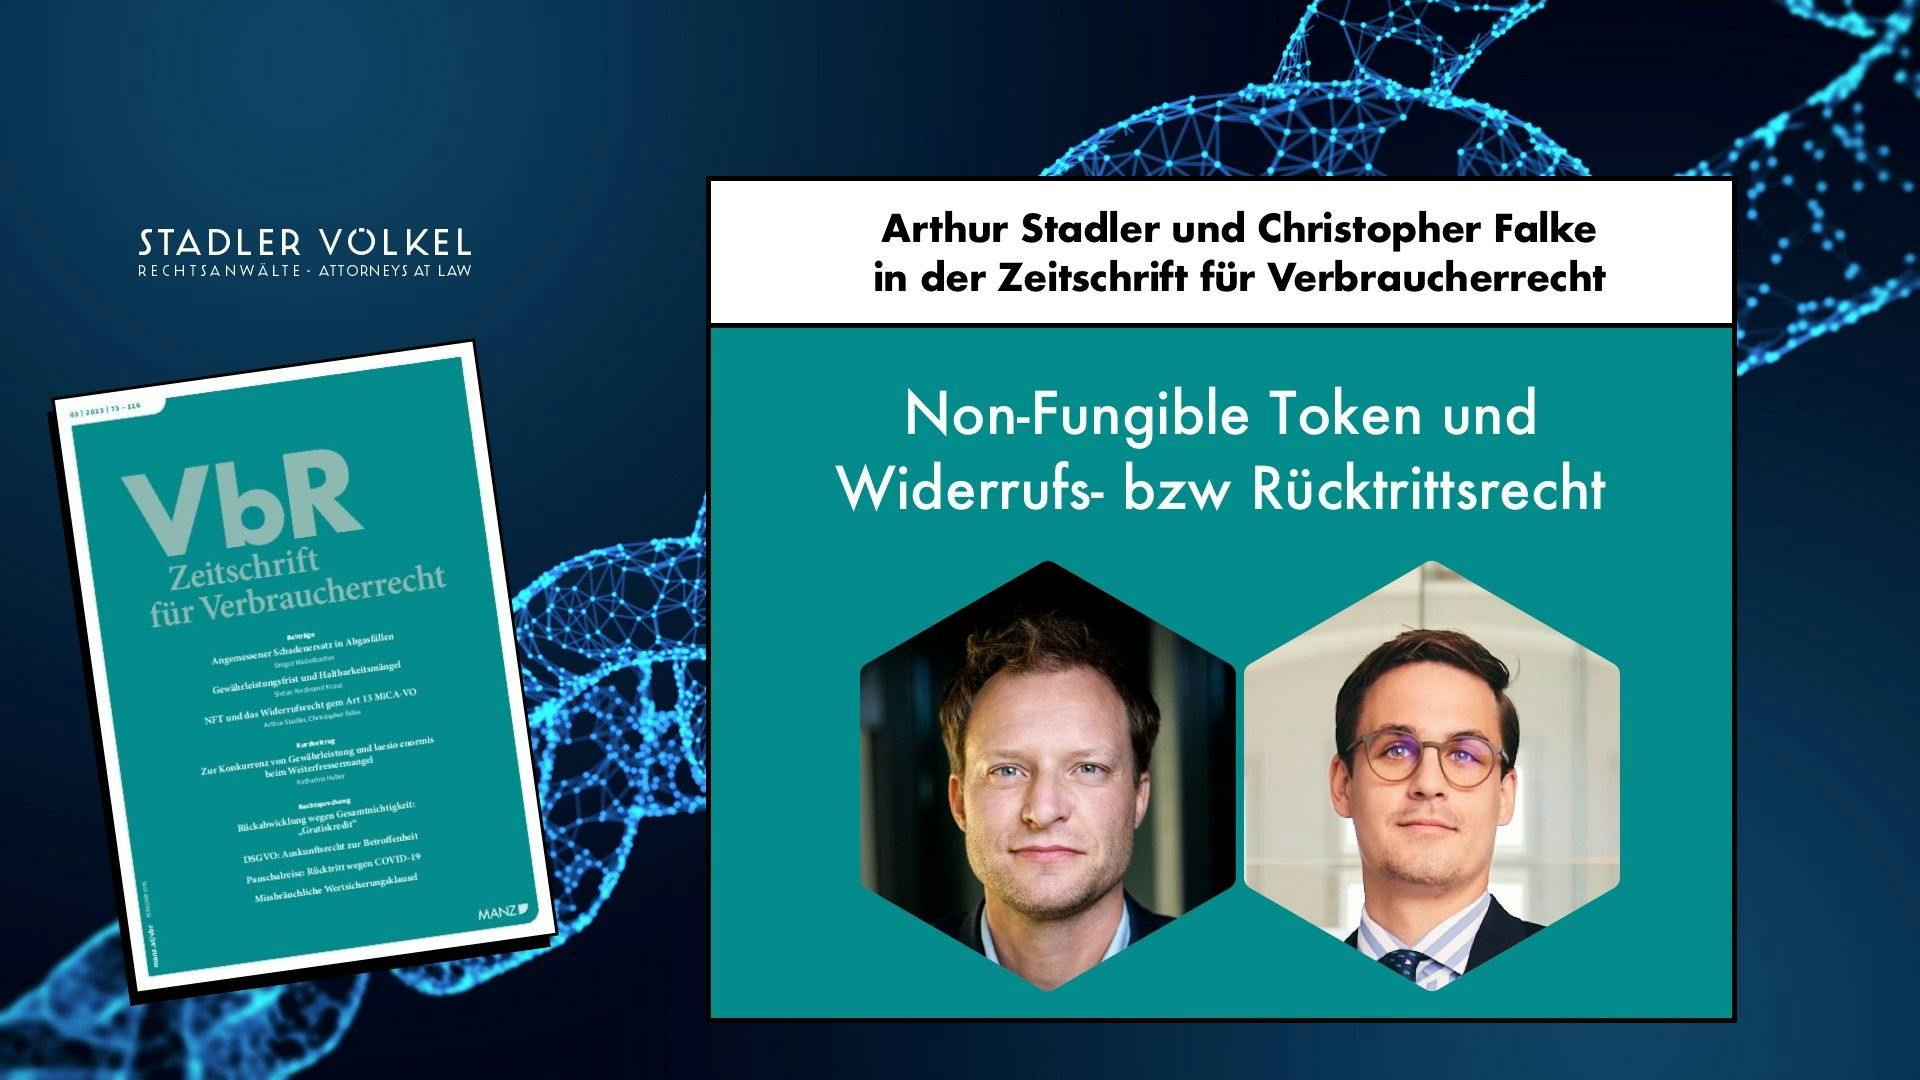 Non-fungible tokens and the right of withdrawal - not an easy relationship at all!